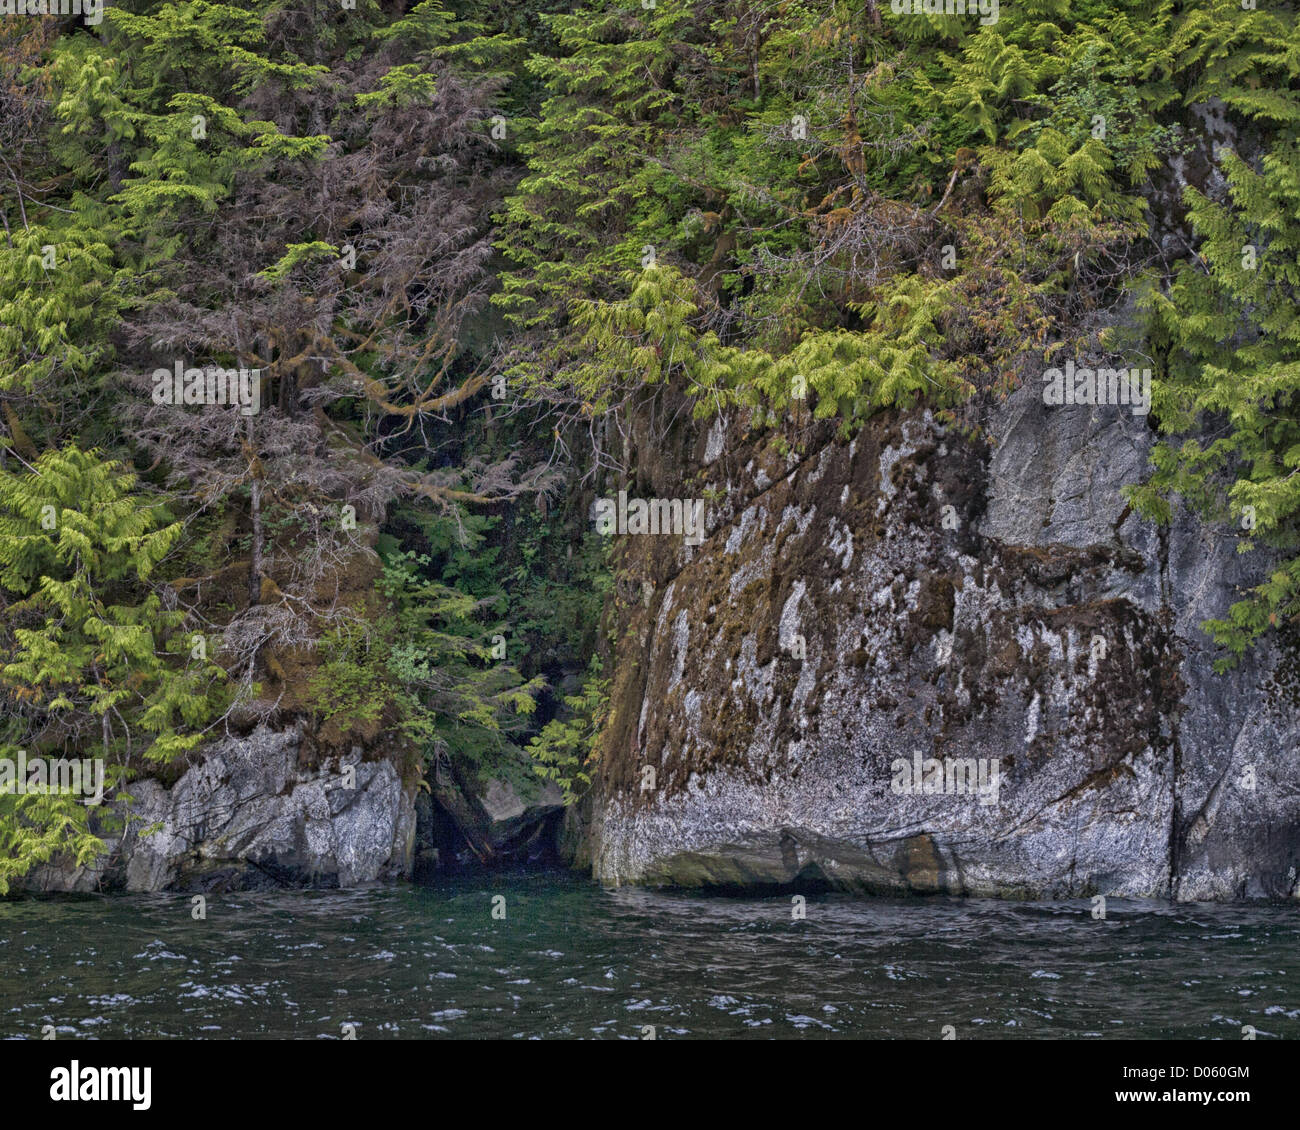 July 6, 2012 - Ketchikan Gateway Borough, Alaska, US - Trees of the evergreen rain forest provide a counterpoint to the 50 to 70 million year old granite walls, sculpted by massive glacier action, in Misty Fjords Rudyerd Bay. Misty Fjords National Monument and Wilderness Area, along the Inside Passage coast of southeastern Alaska, is administered by the U.S. Forest Service and covers 2,294,343Â acres (9,246Â km) of Tongass National Forest, the largest wilderness in Alaskan national forests and is only accessible by floatplane or boat. (Credit Image: © Arnold Drapkin/ZUMAPRESS.com) Stock Photo